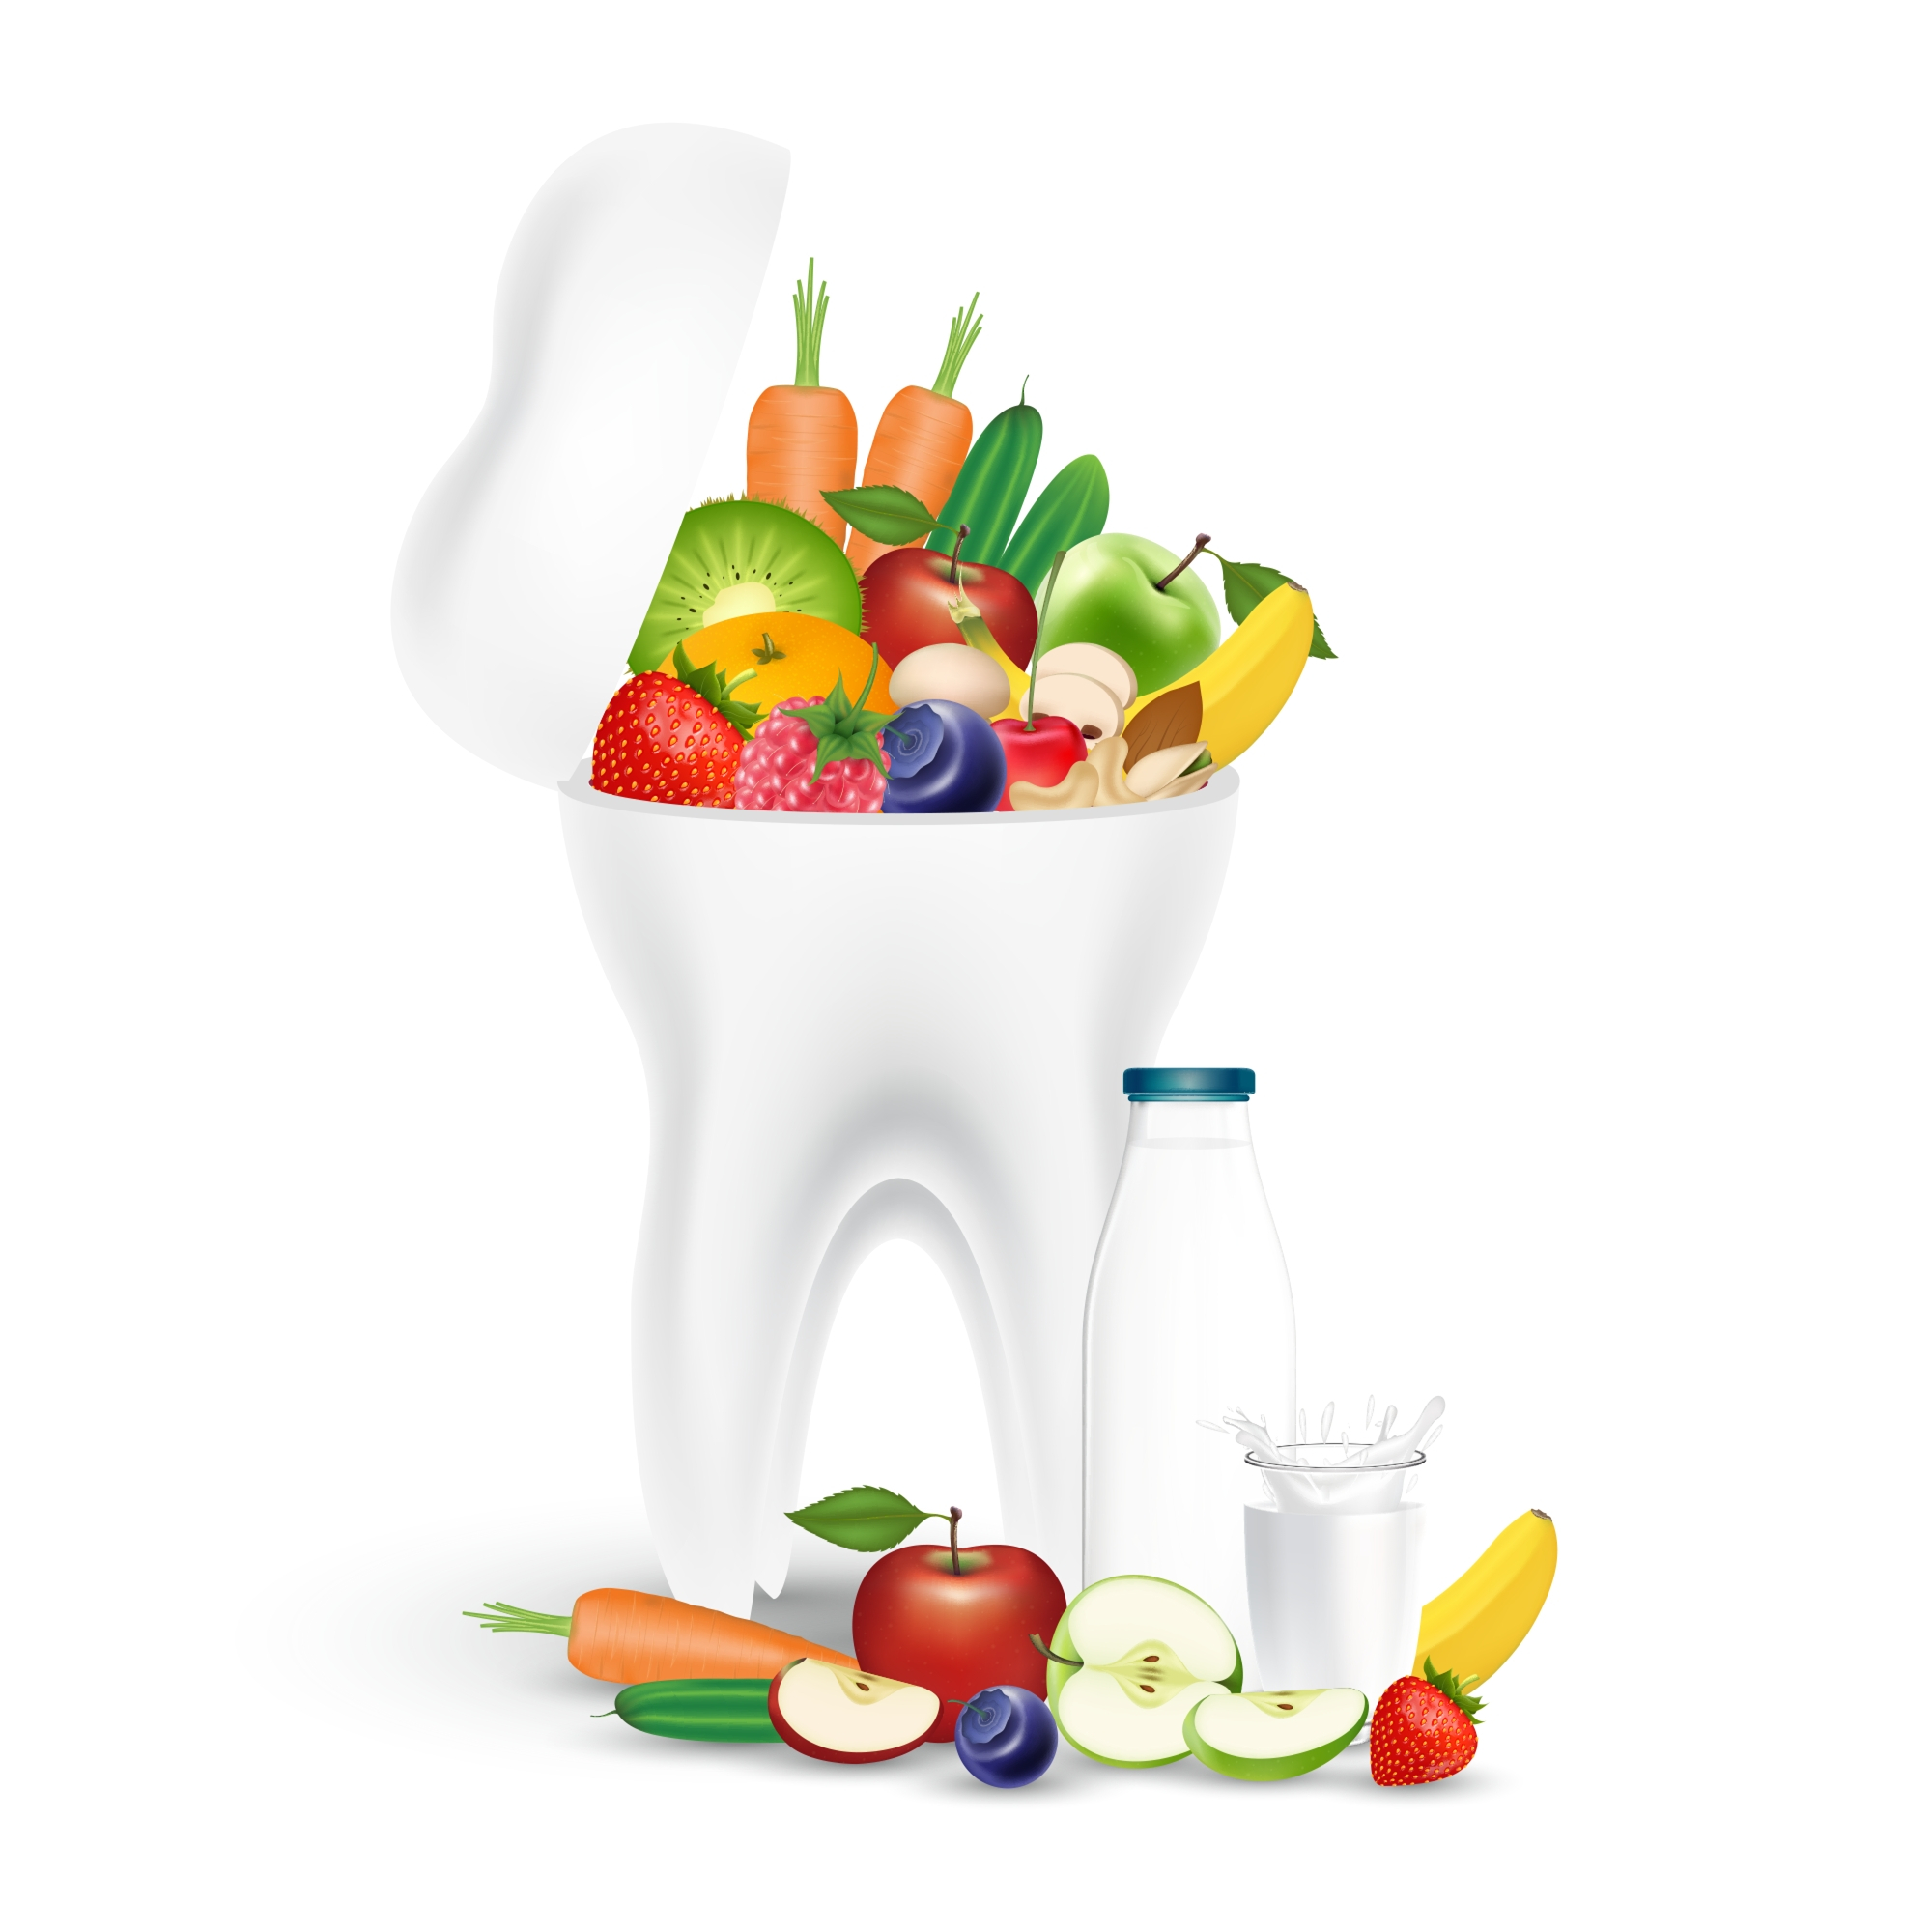 nutritional habits for strong and healthy teeth